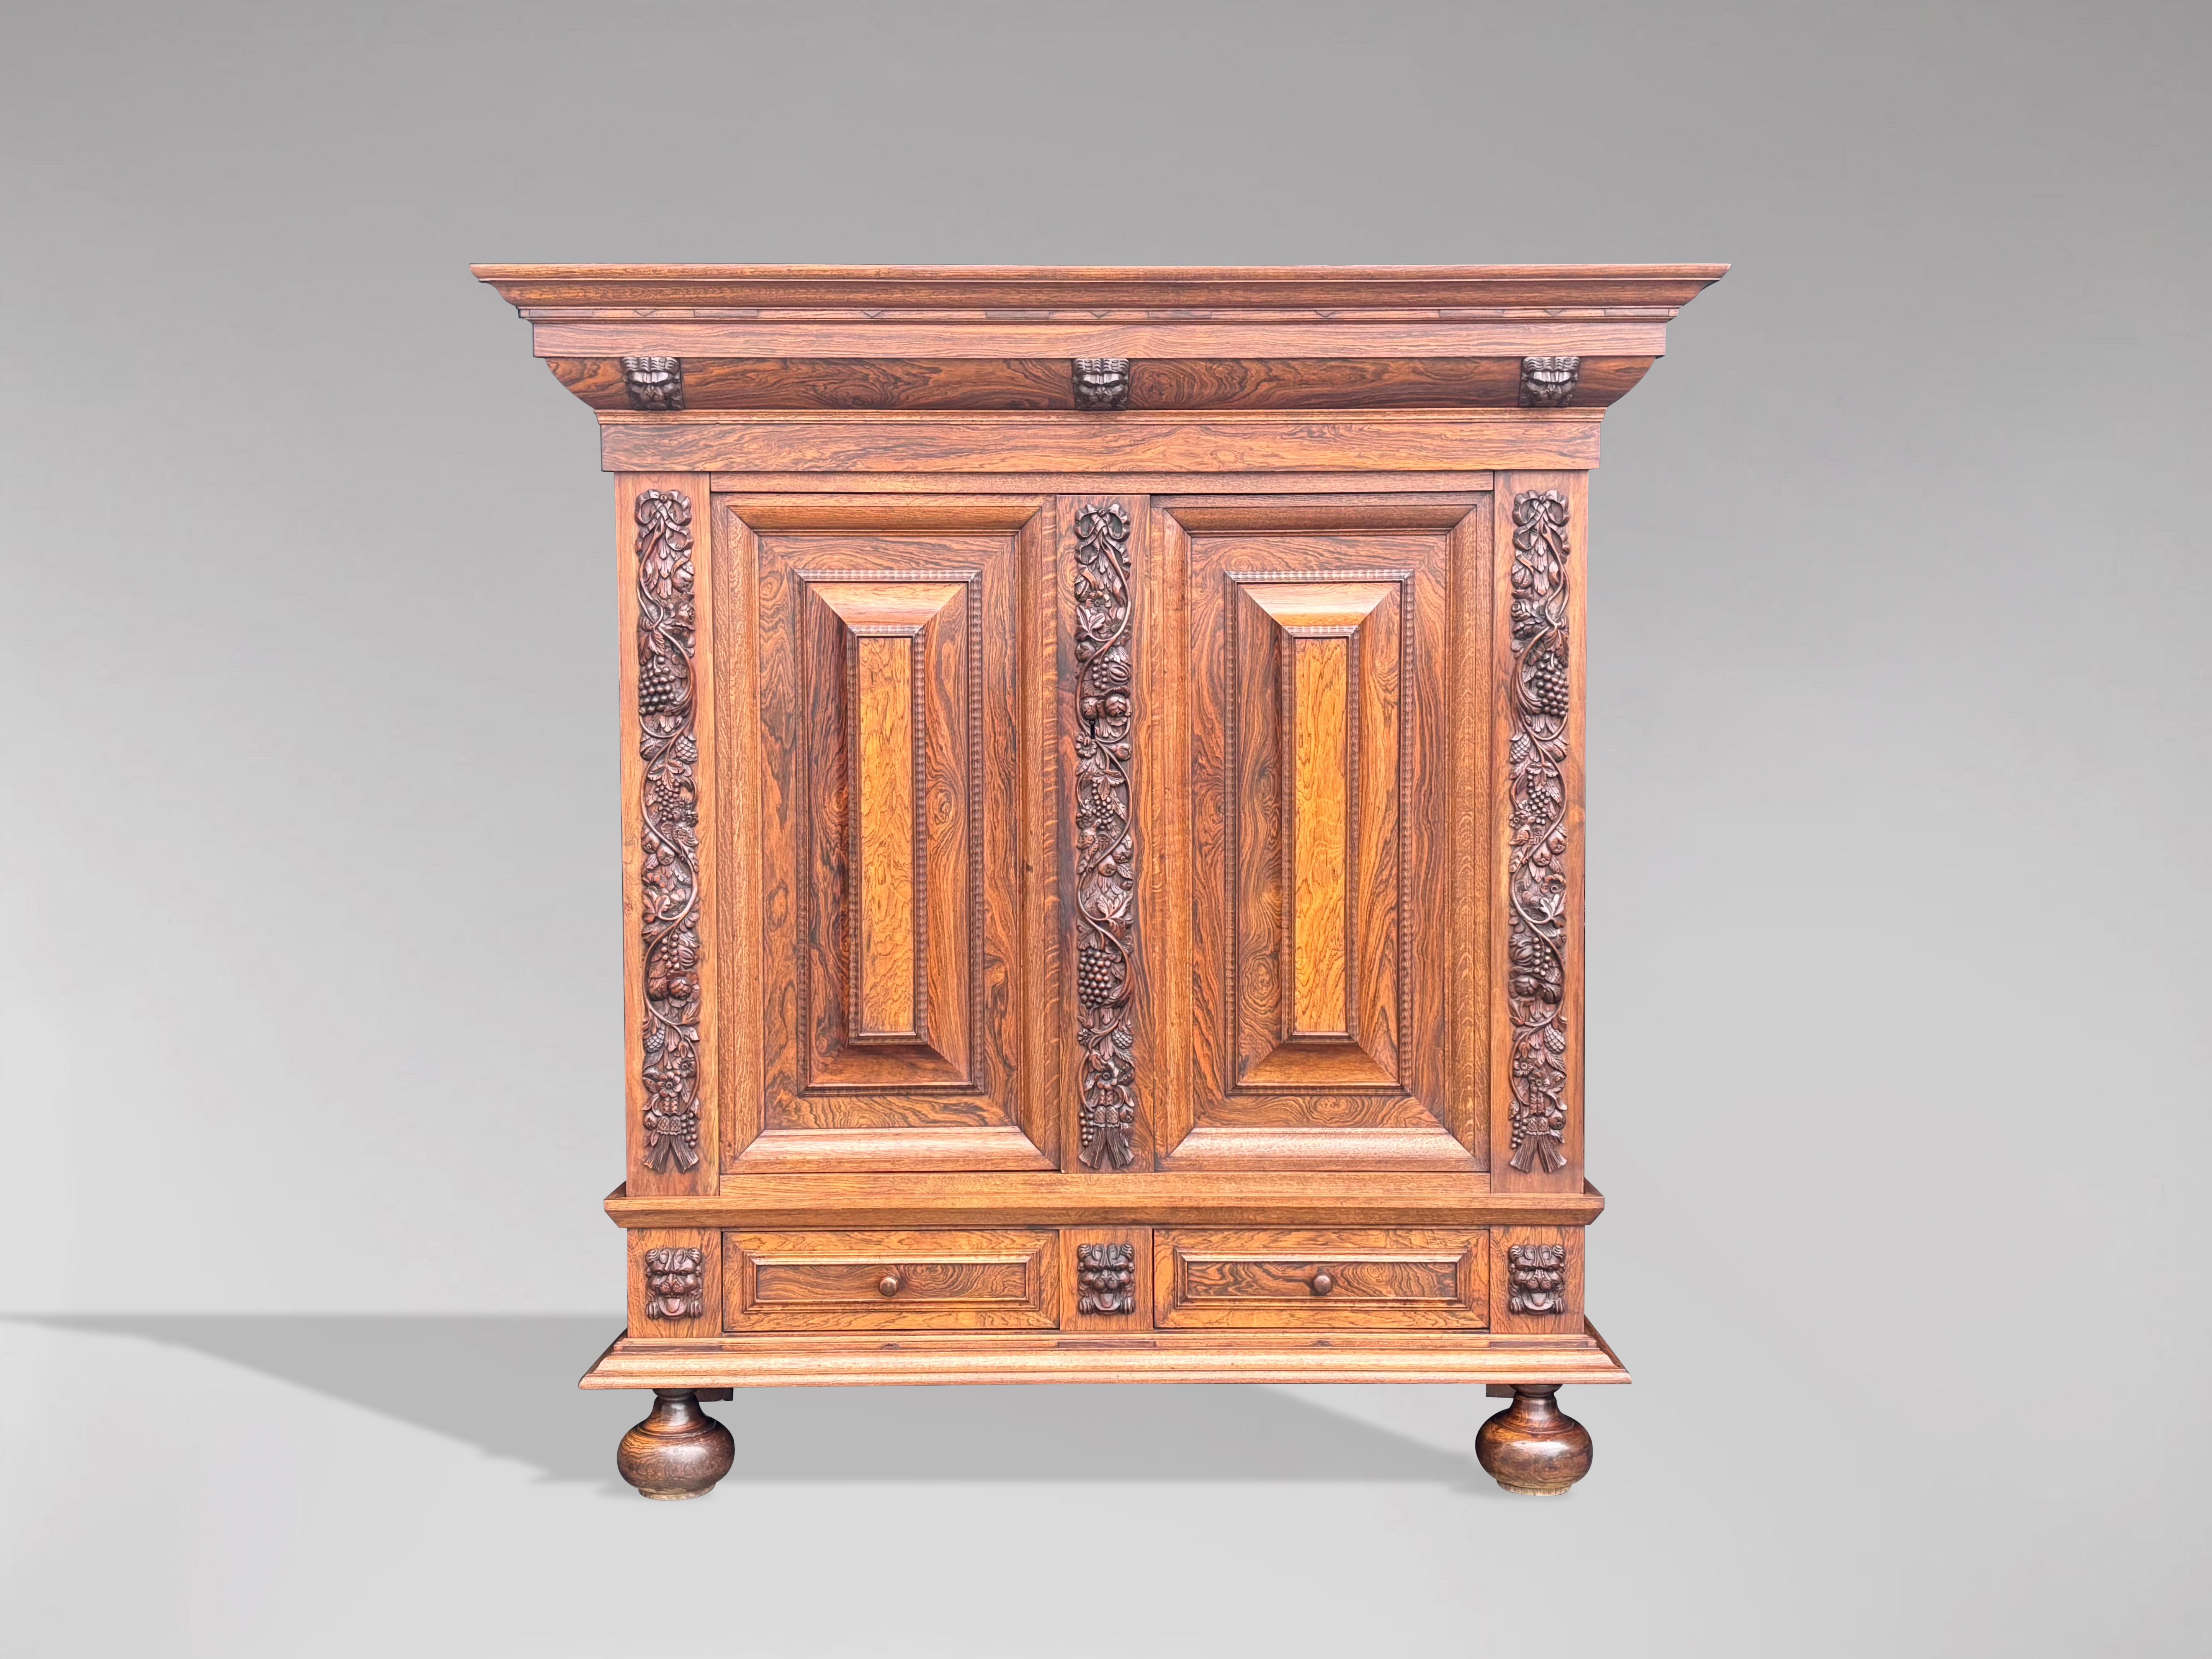 19th Century Dutch Renaissance Rosewood Cabinet In Good Condition For Sale In Petworth,West Sussex, GB